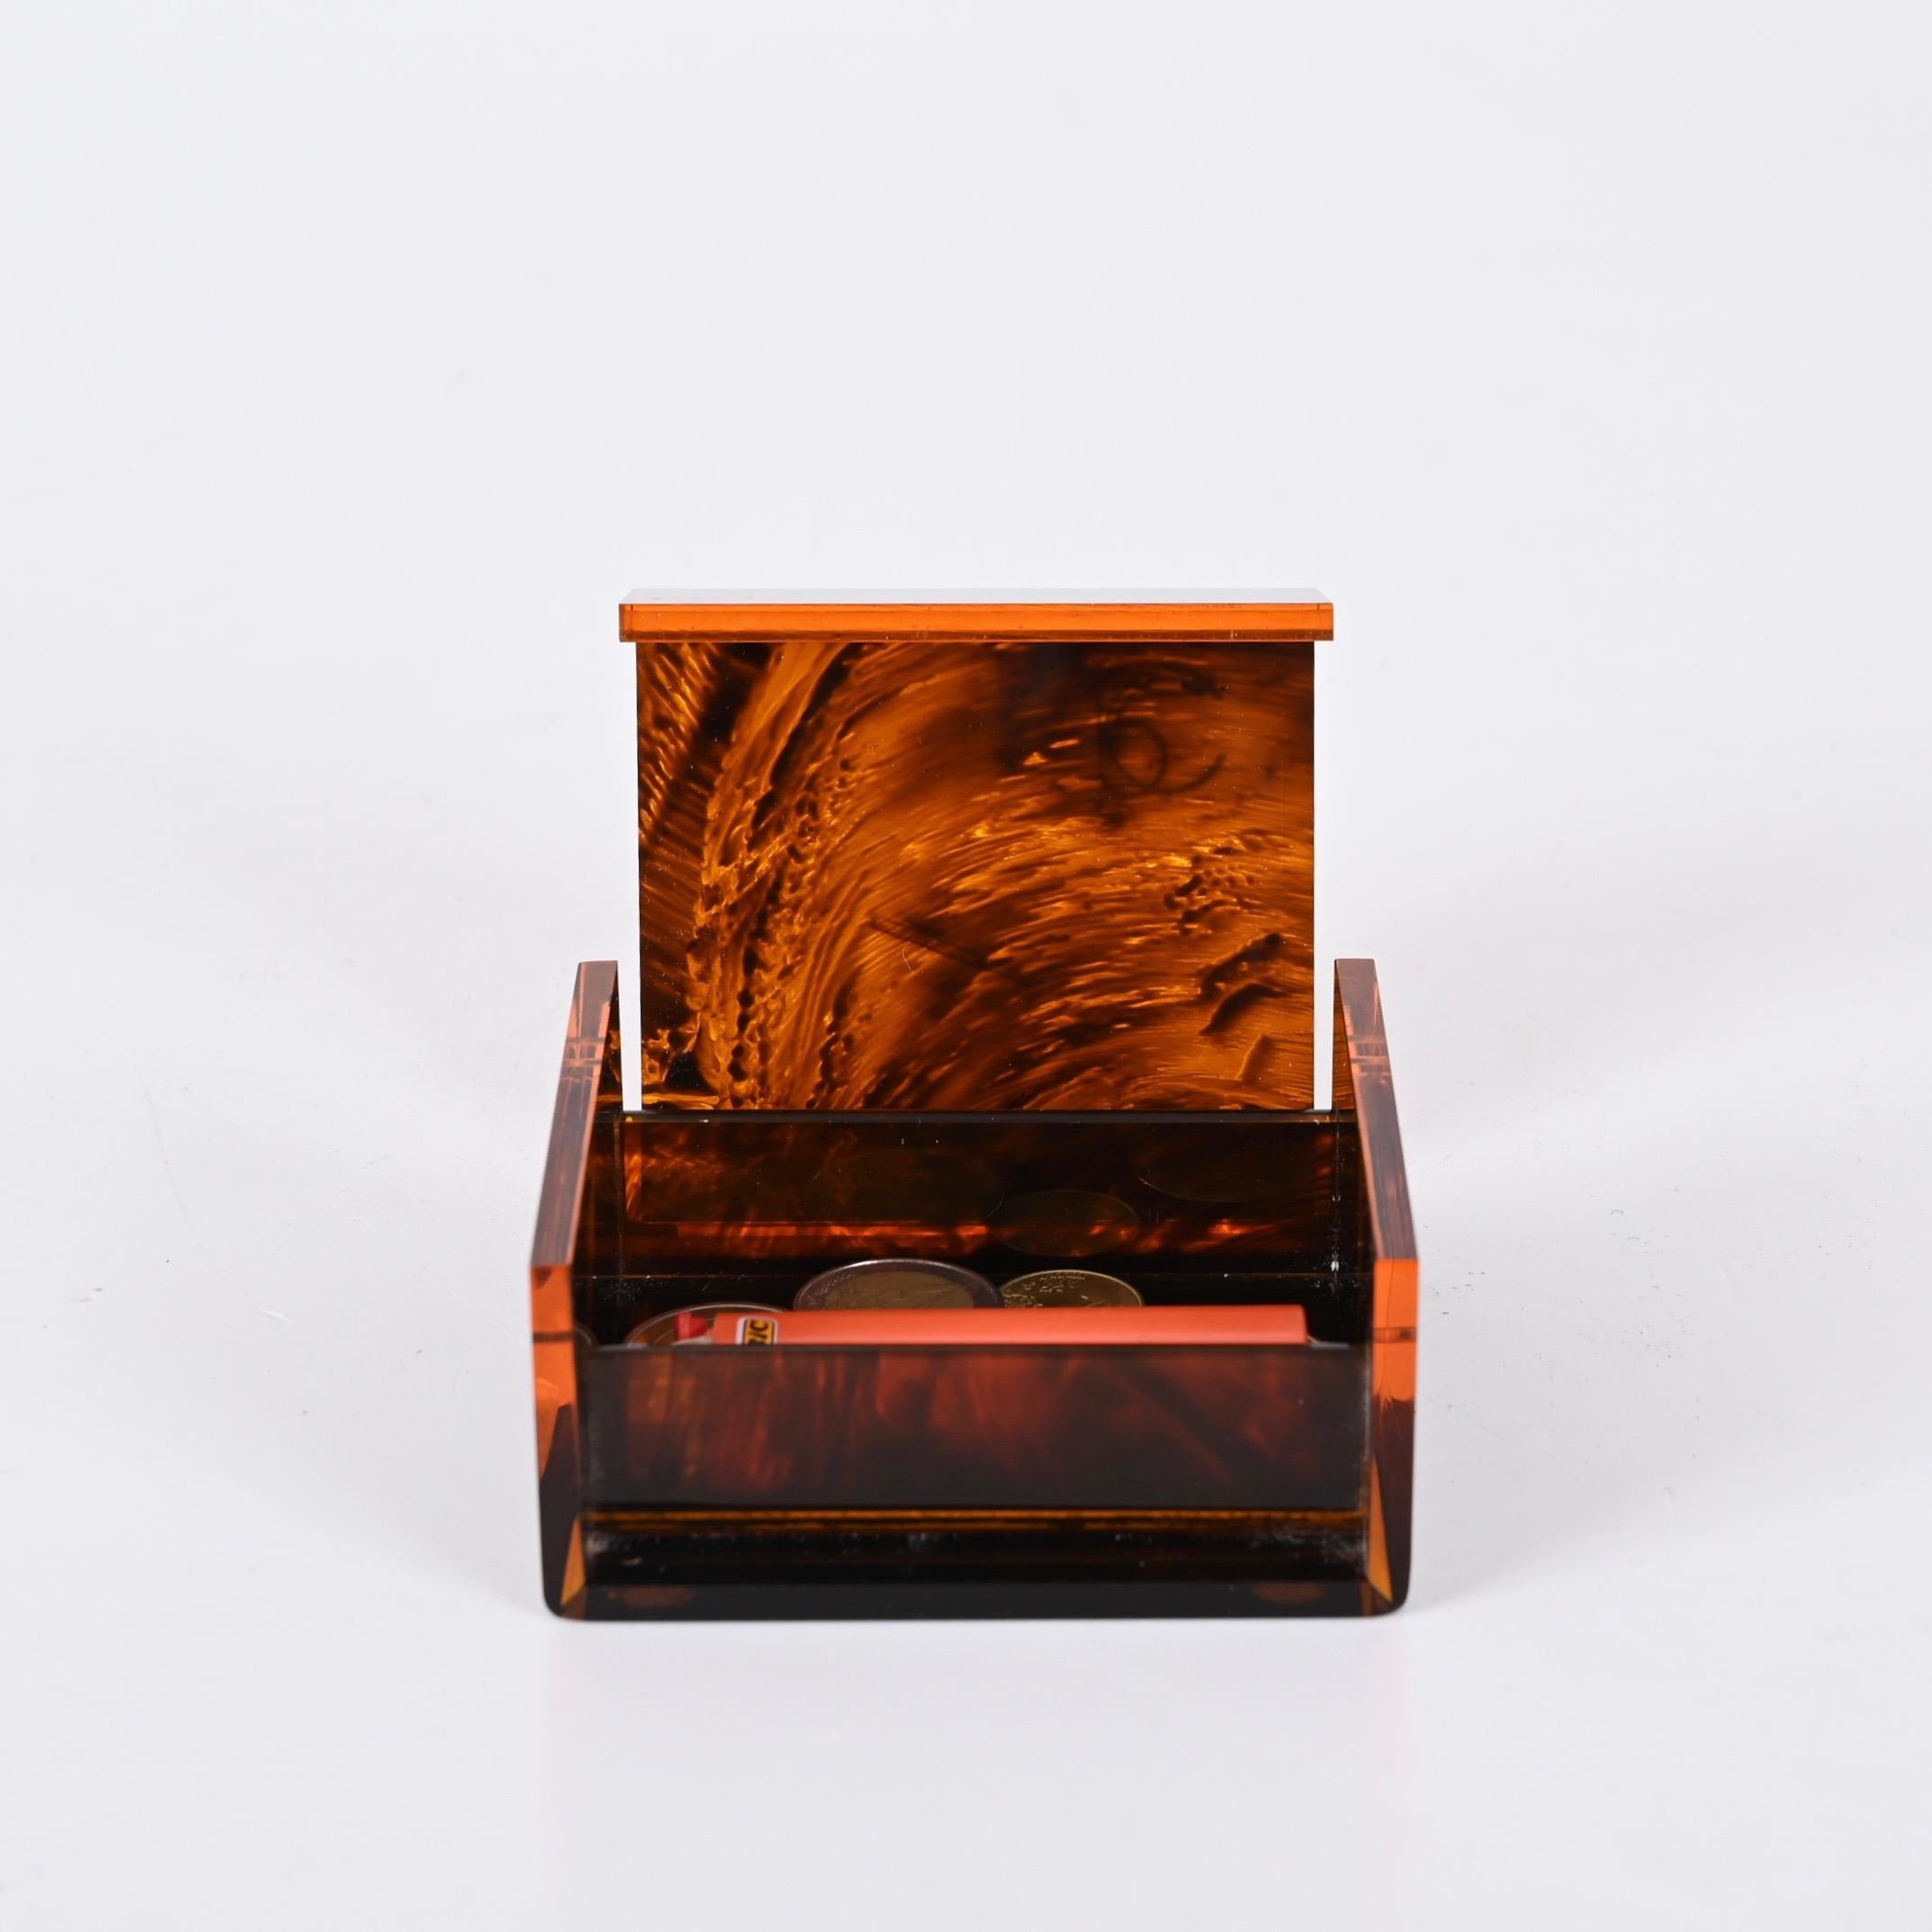 Roberto Cavalli Lucite Jewelry Box with Tortoise Effect, Italy, 1970s For Sale 8